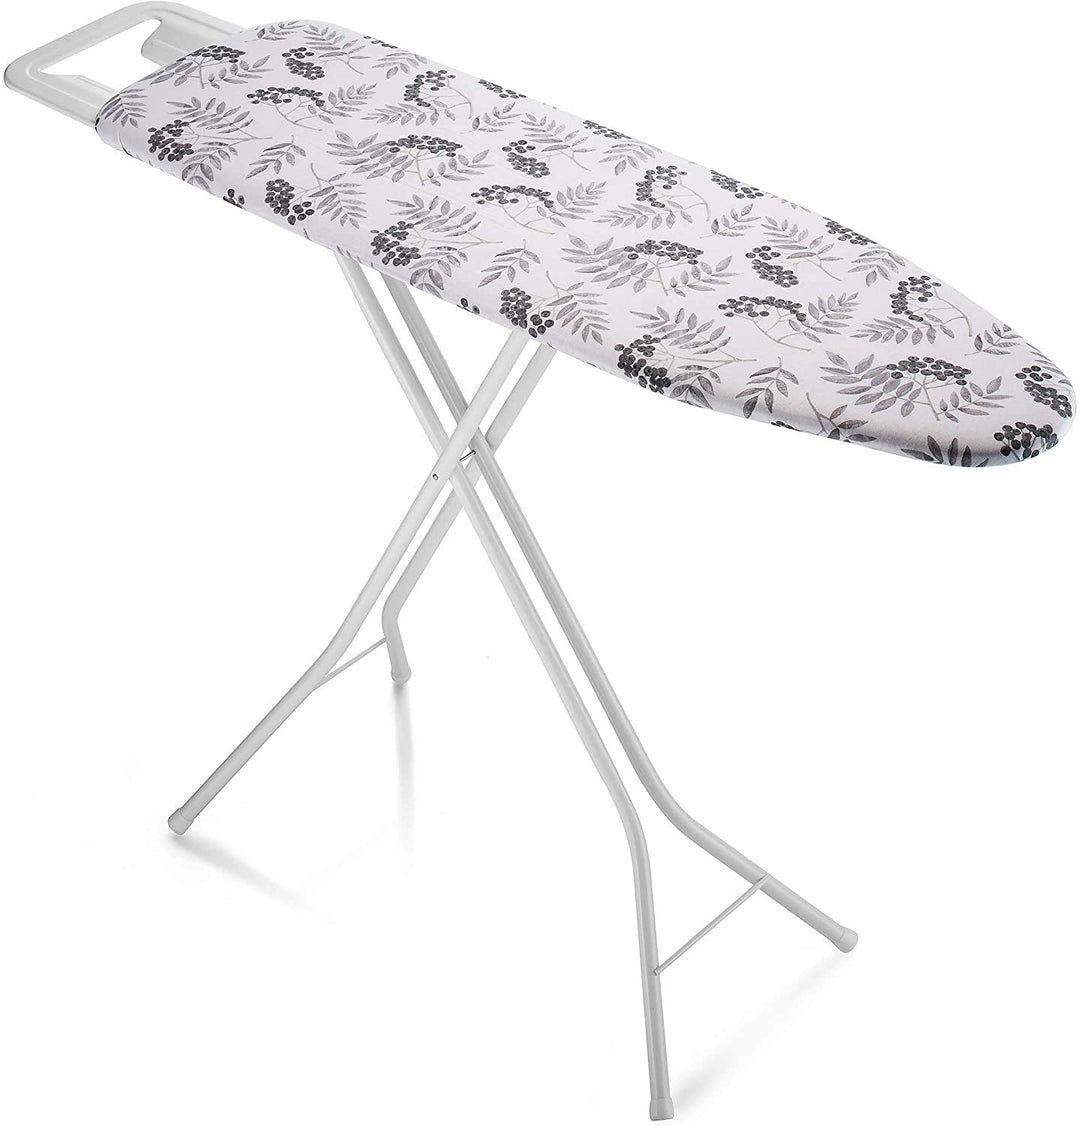 Bartnelli Rorets Ironing Board with Cover Pad, Height Adjustable, Safety Iron Rest, Safety Storage Lock, 4 Leg, 3 Layer Pad, Home Laundry Room or Dorm Use